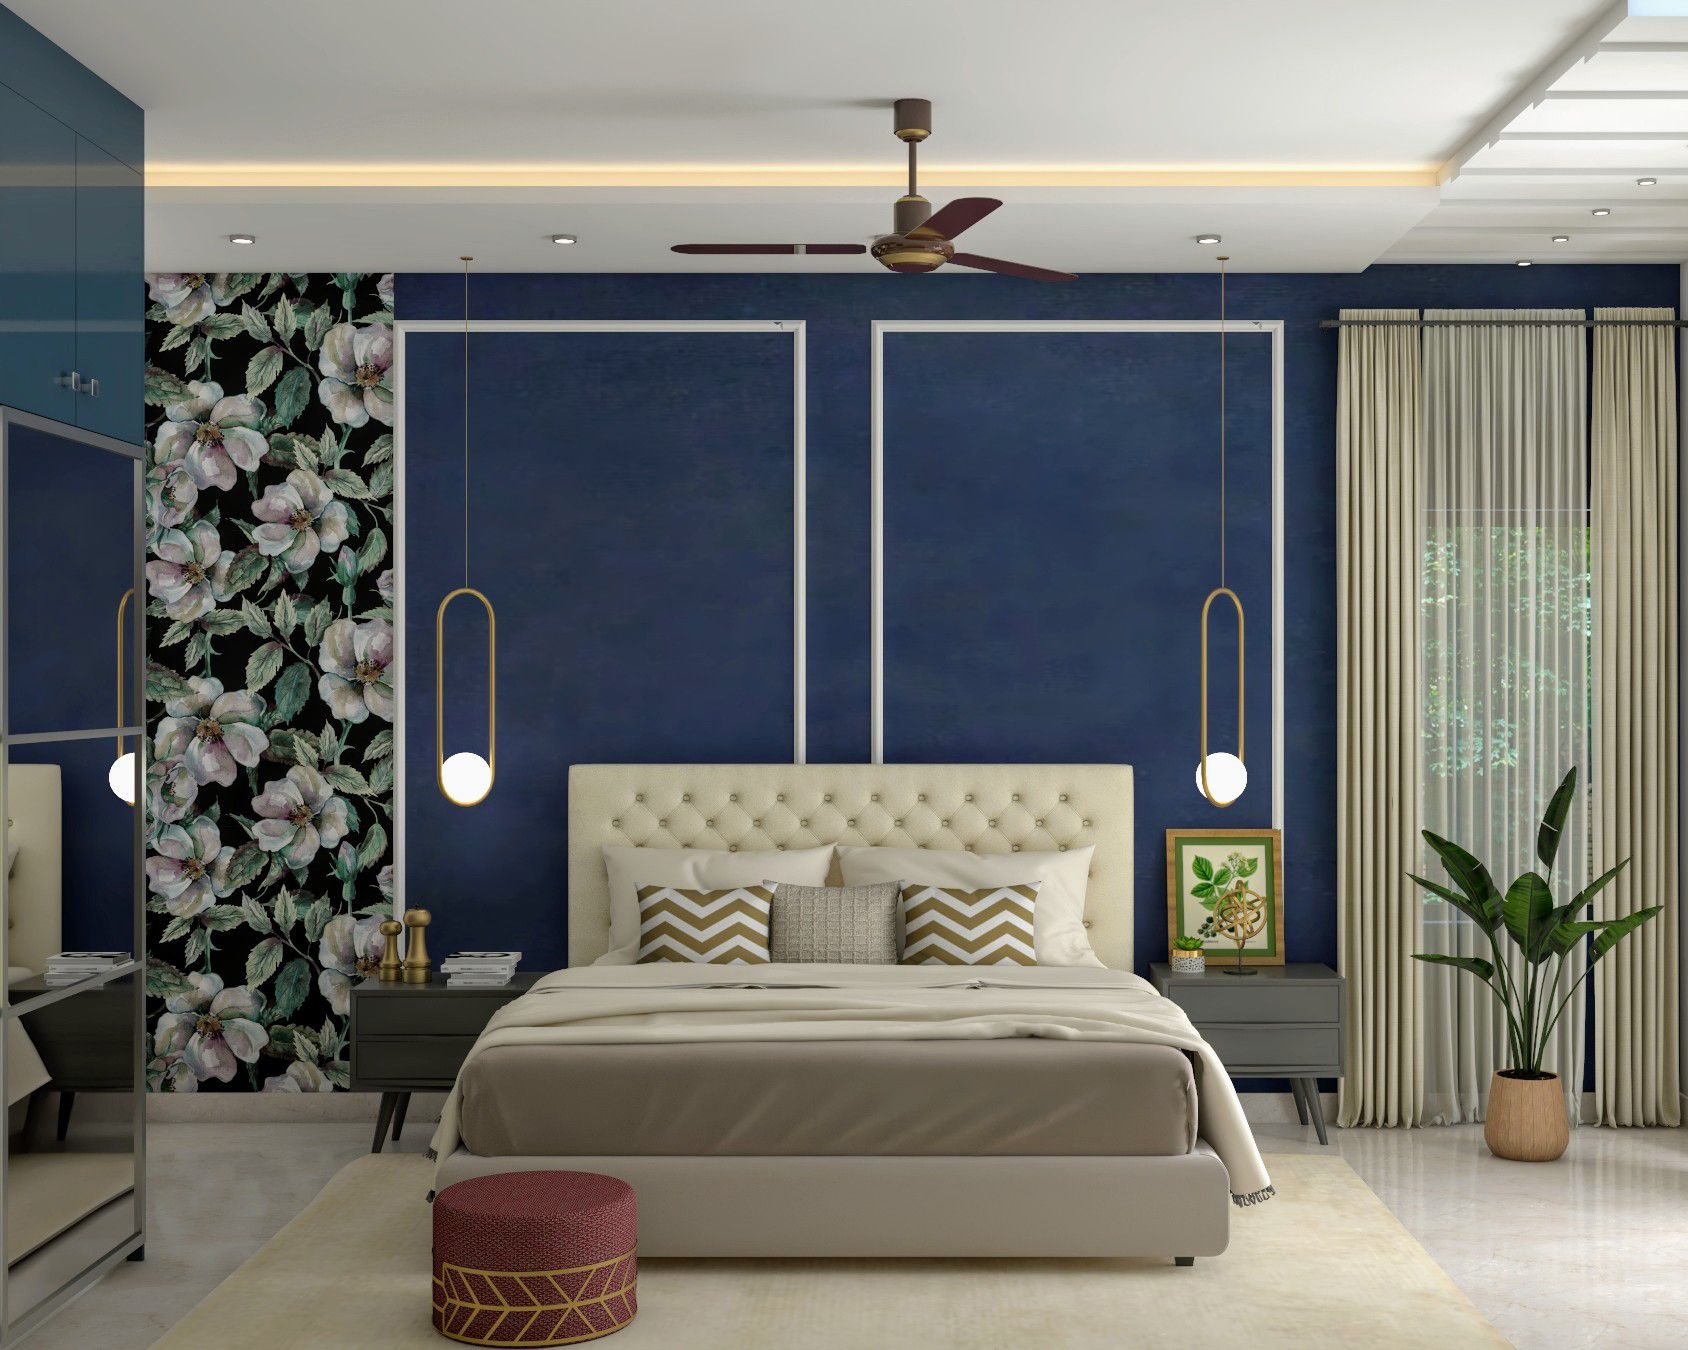 Contemporary Dark Blue And White Wall Design With Wall Trims And Floral Wallpaper